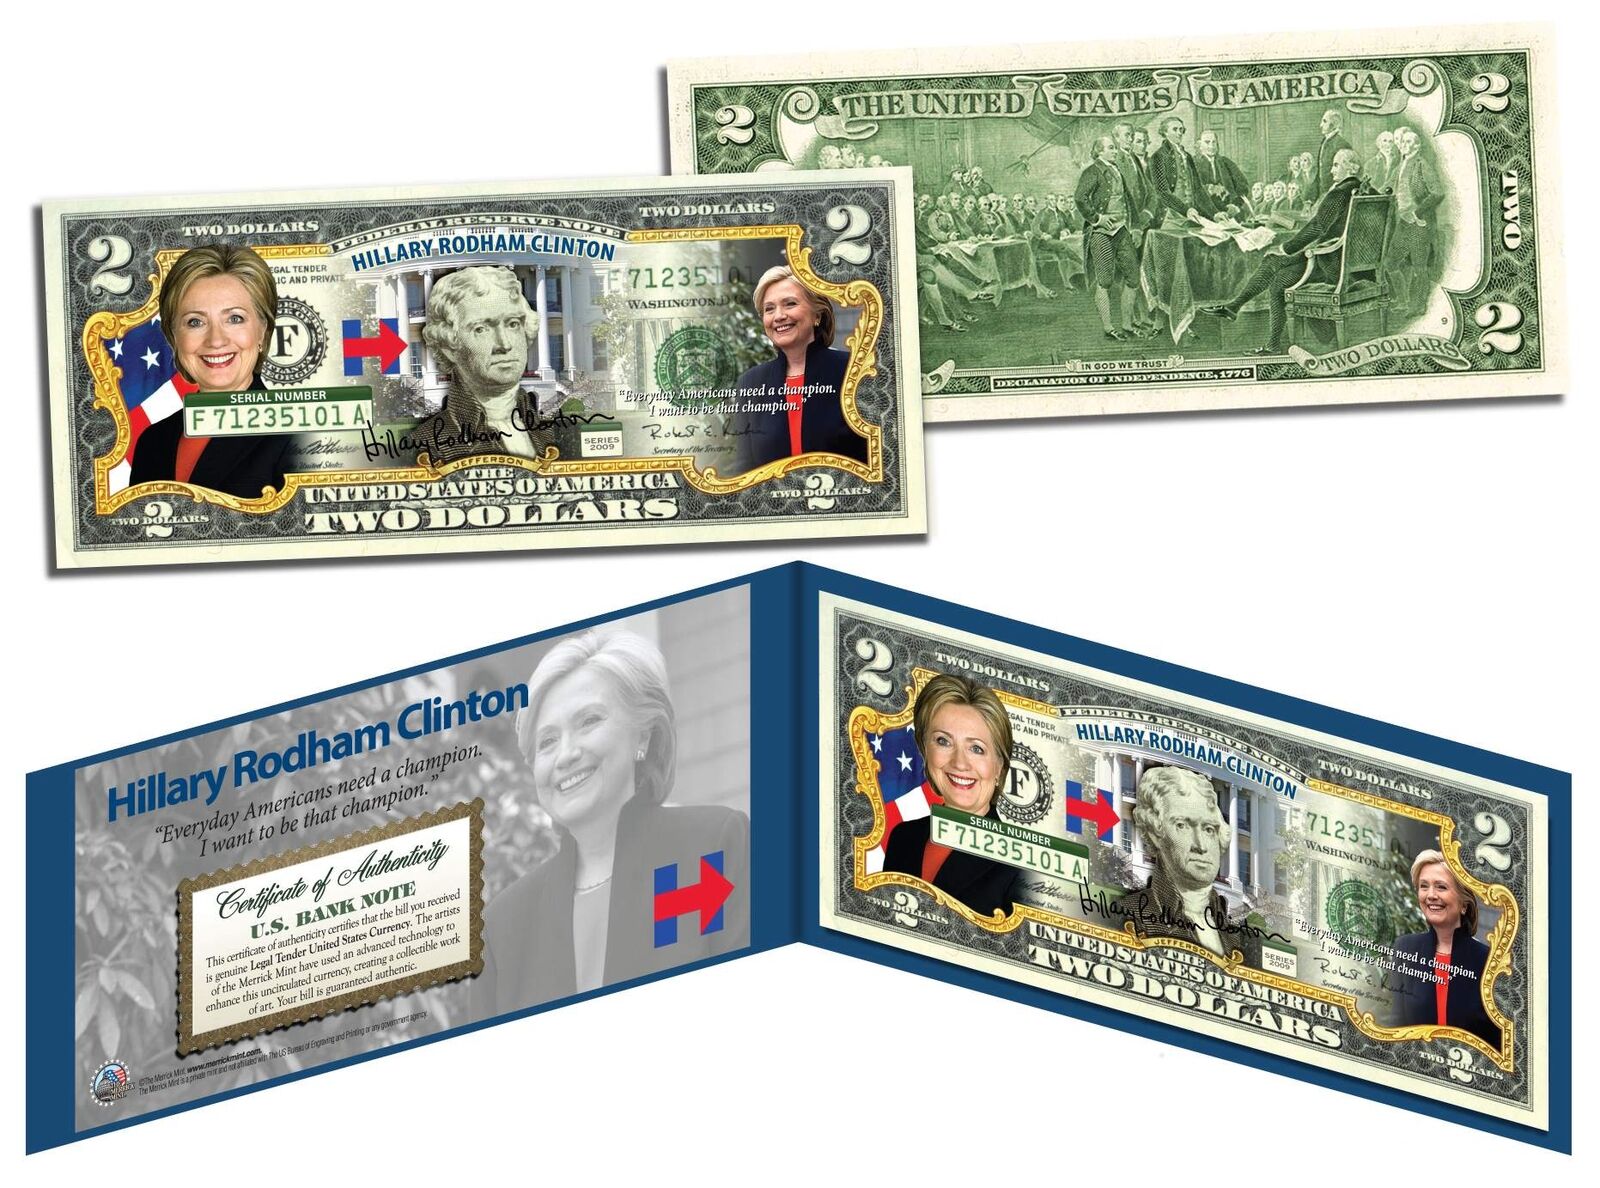 HILLARY RODHAM CLINTON Campaign 2016 President Colorized $2 Bill US Legal Tender